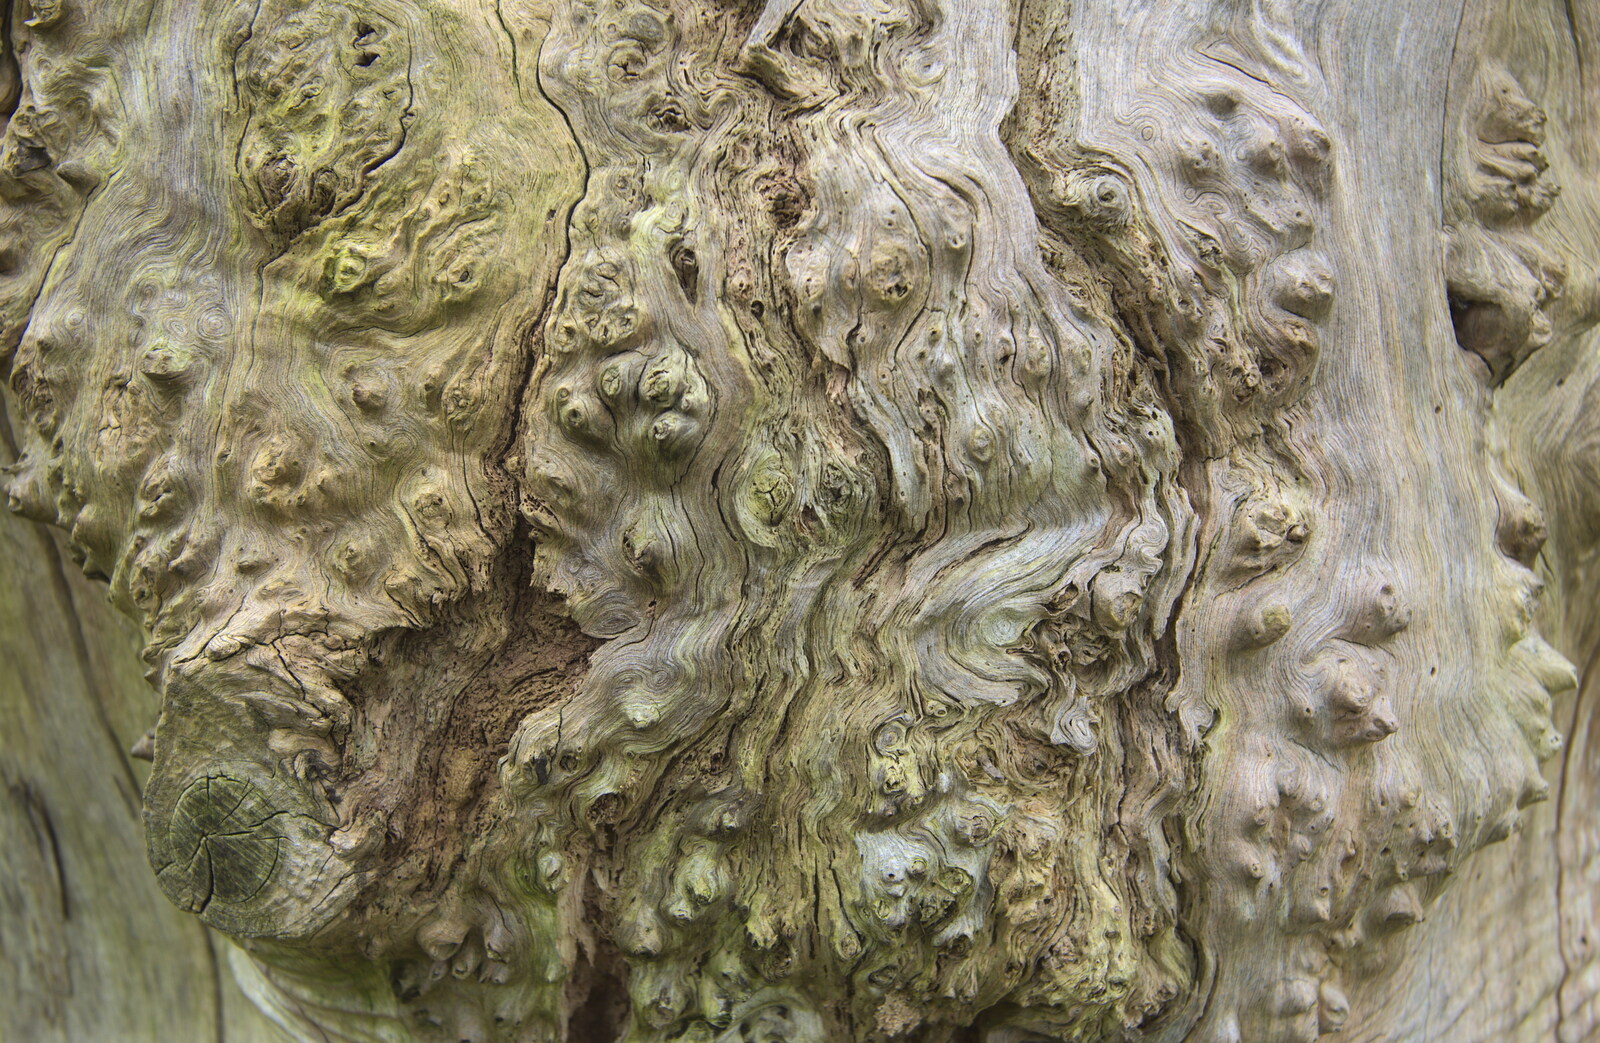 Cool knobbly oak bark from A Walk at Grandad's, Bramford Dereliction and BSCC at Yaxley, Eye, Suffolk - 2nd April 2013